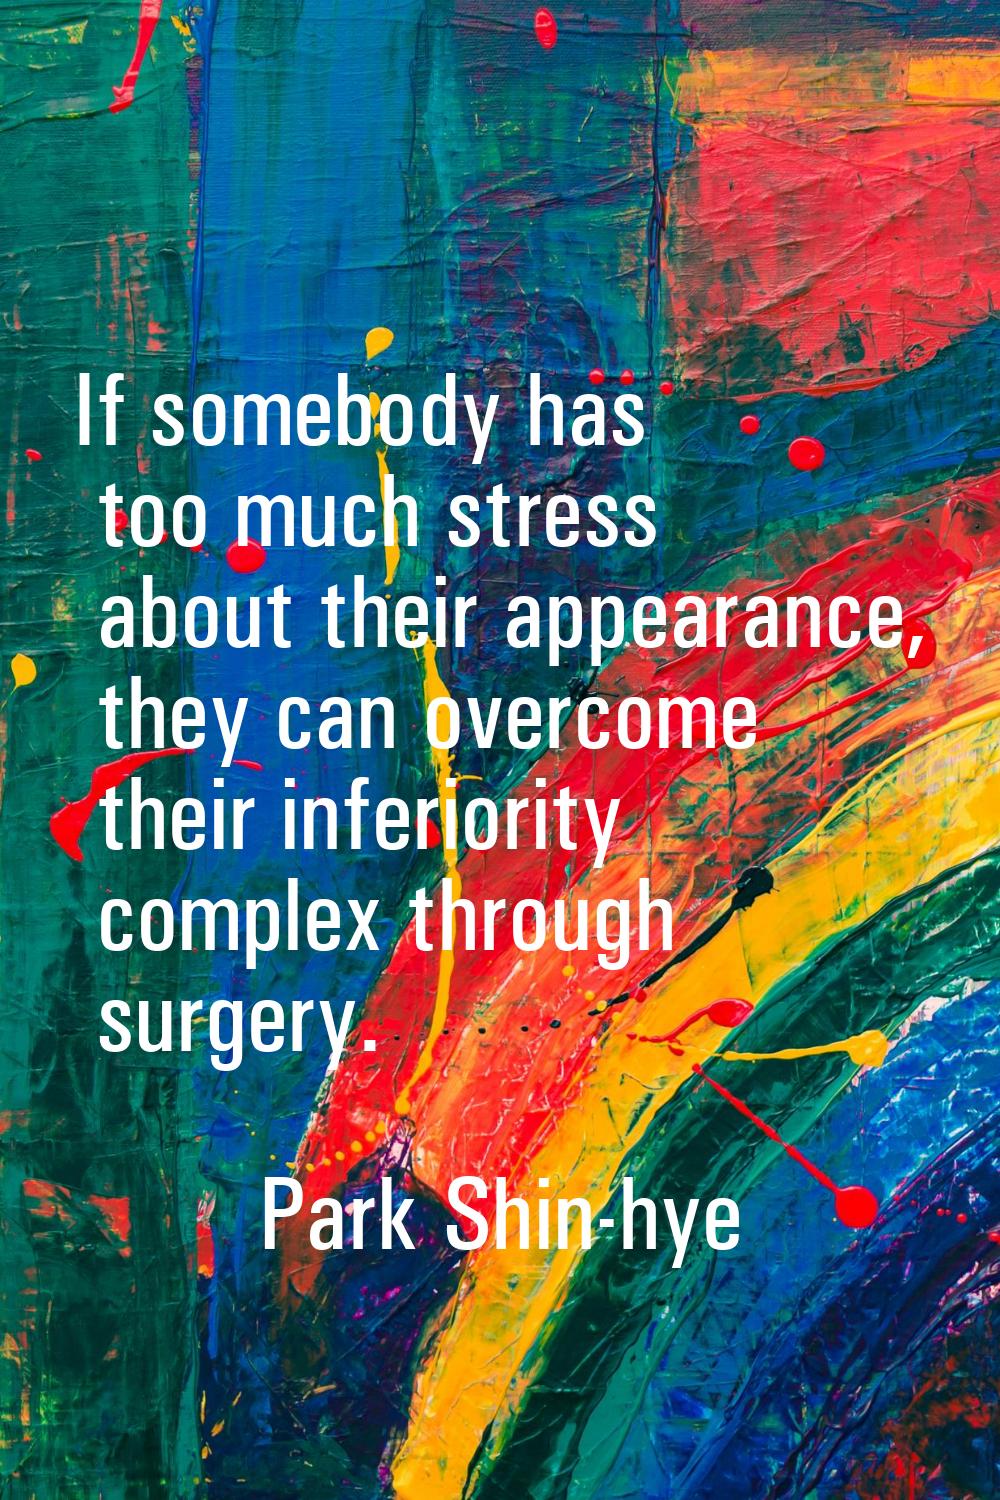 If somebody has too much stress about their appearance, they can overcome their inferiority complex